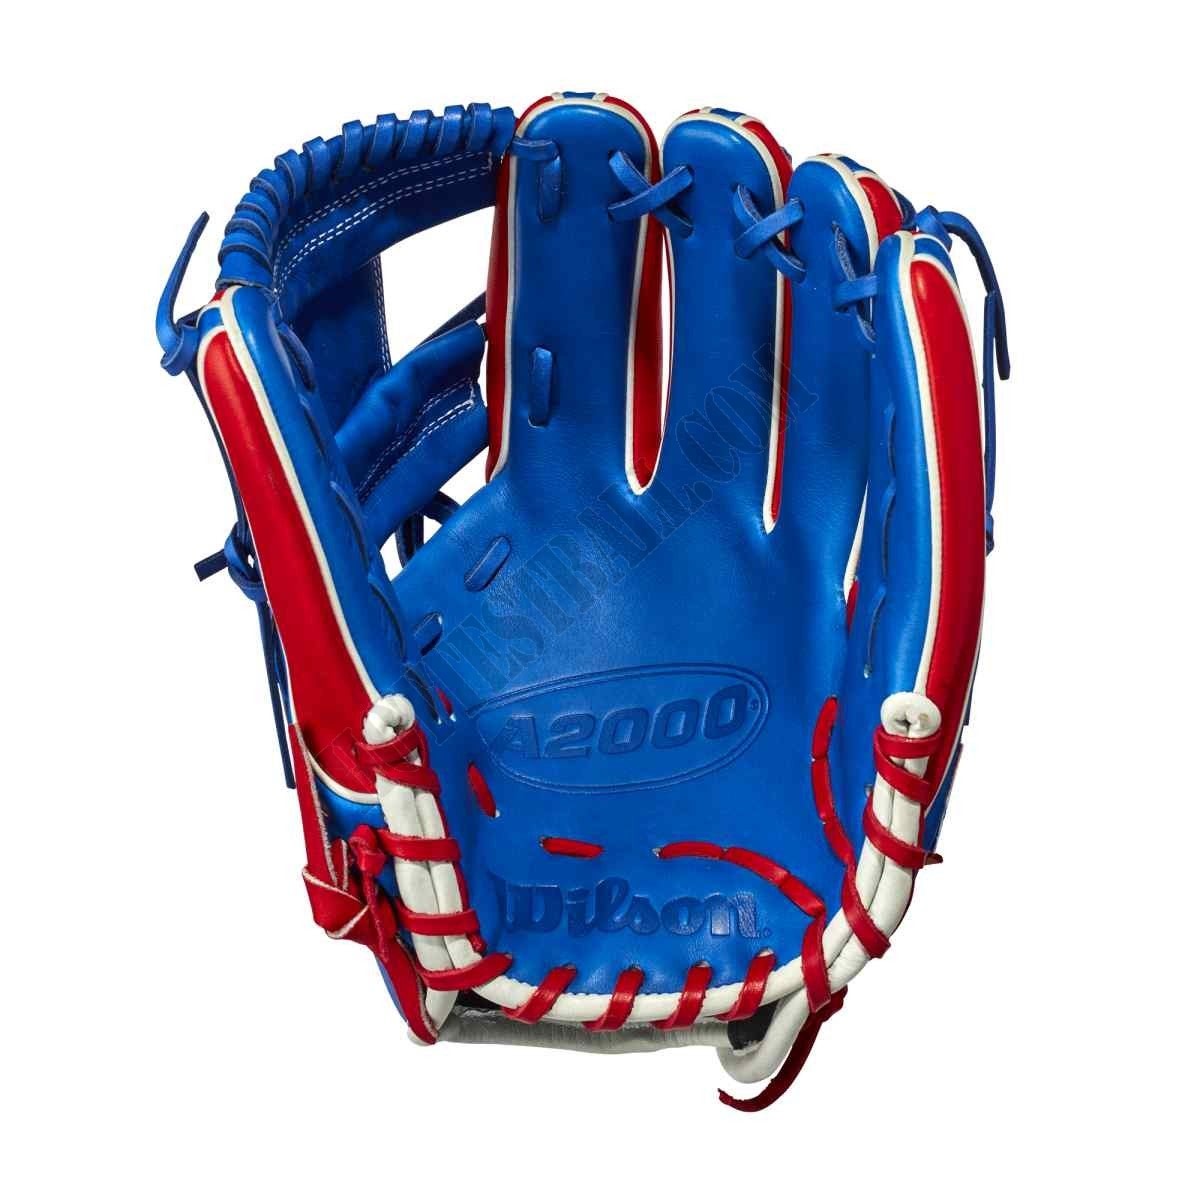 2021 A2000 1786 Dominican Republic 11.5" Infield Baseball Glove - Limited Edition ● Wilson Promotions - -2